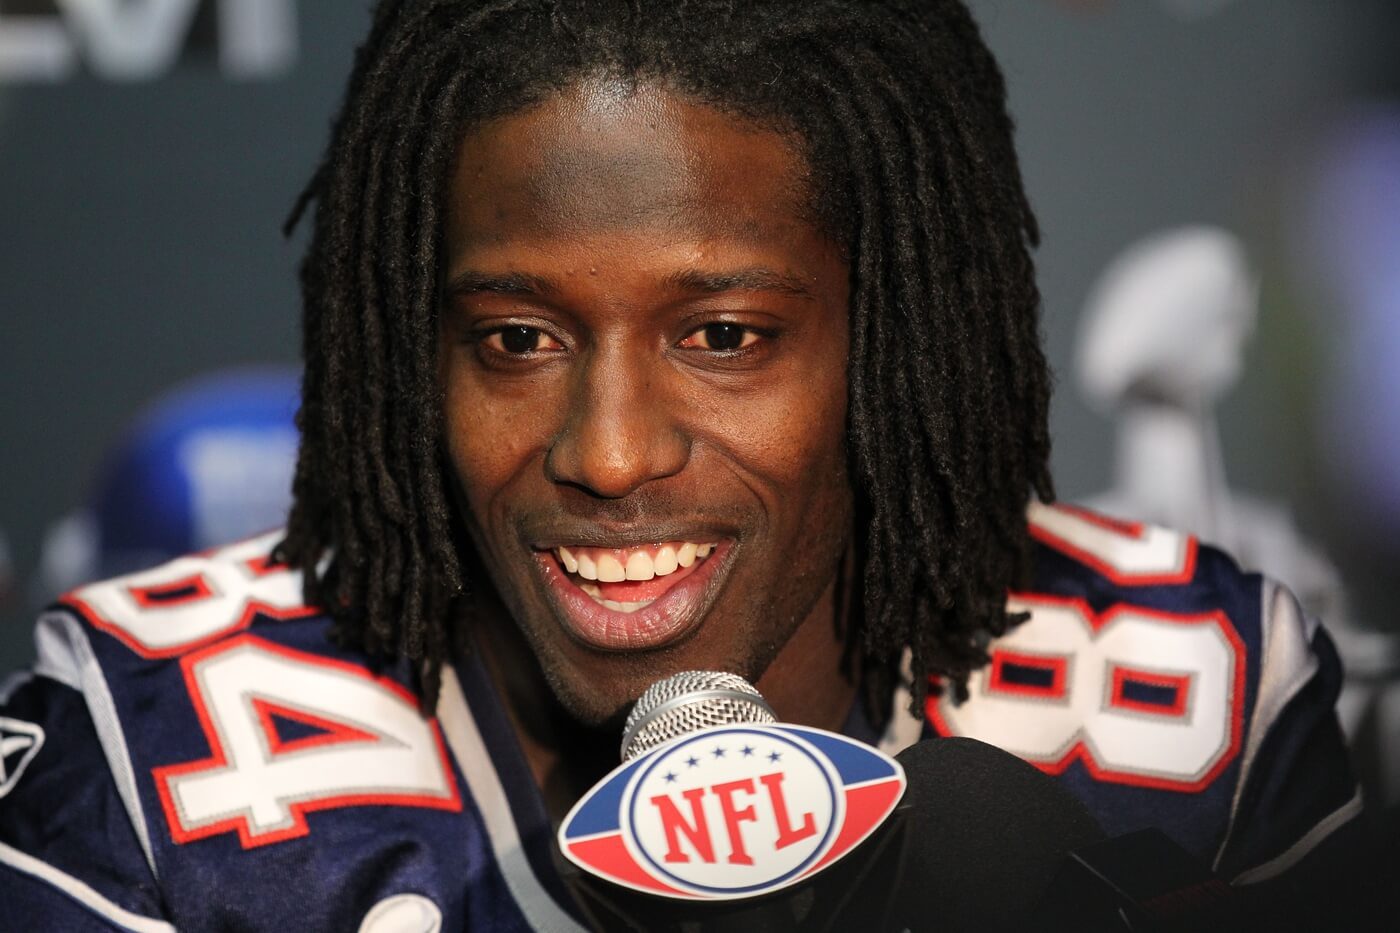 Feb 2, 2012; Indianapolis, IN, USA; New England Patriots receiver Deion Branch (84) answers questions during a press conference in preparation for Super Bowl XLVI against the New York Giants at Lucas Oil Stadium. Mandatory Credit: Matthew Emmons-USA TODAY Sports